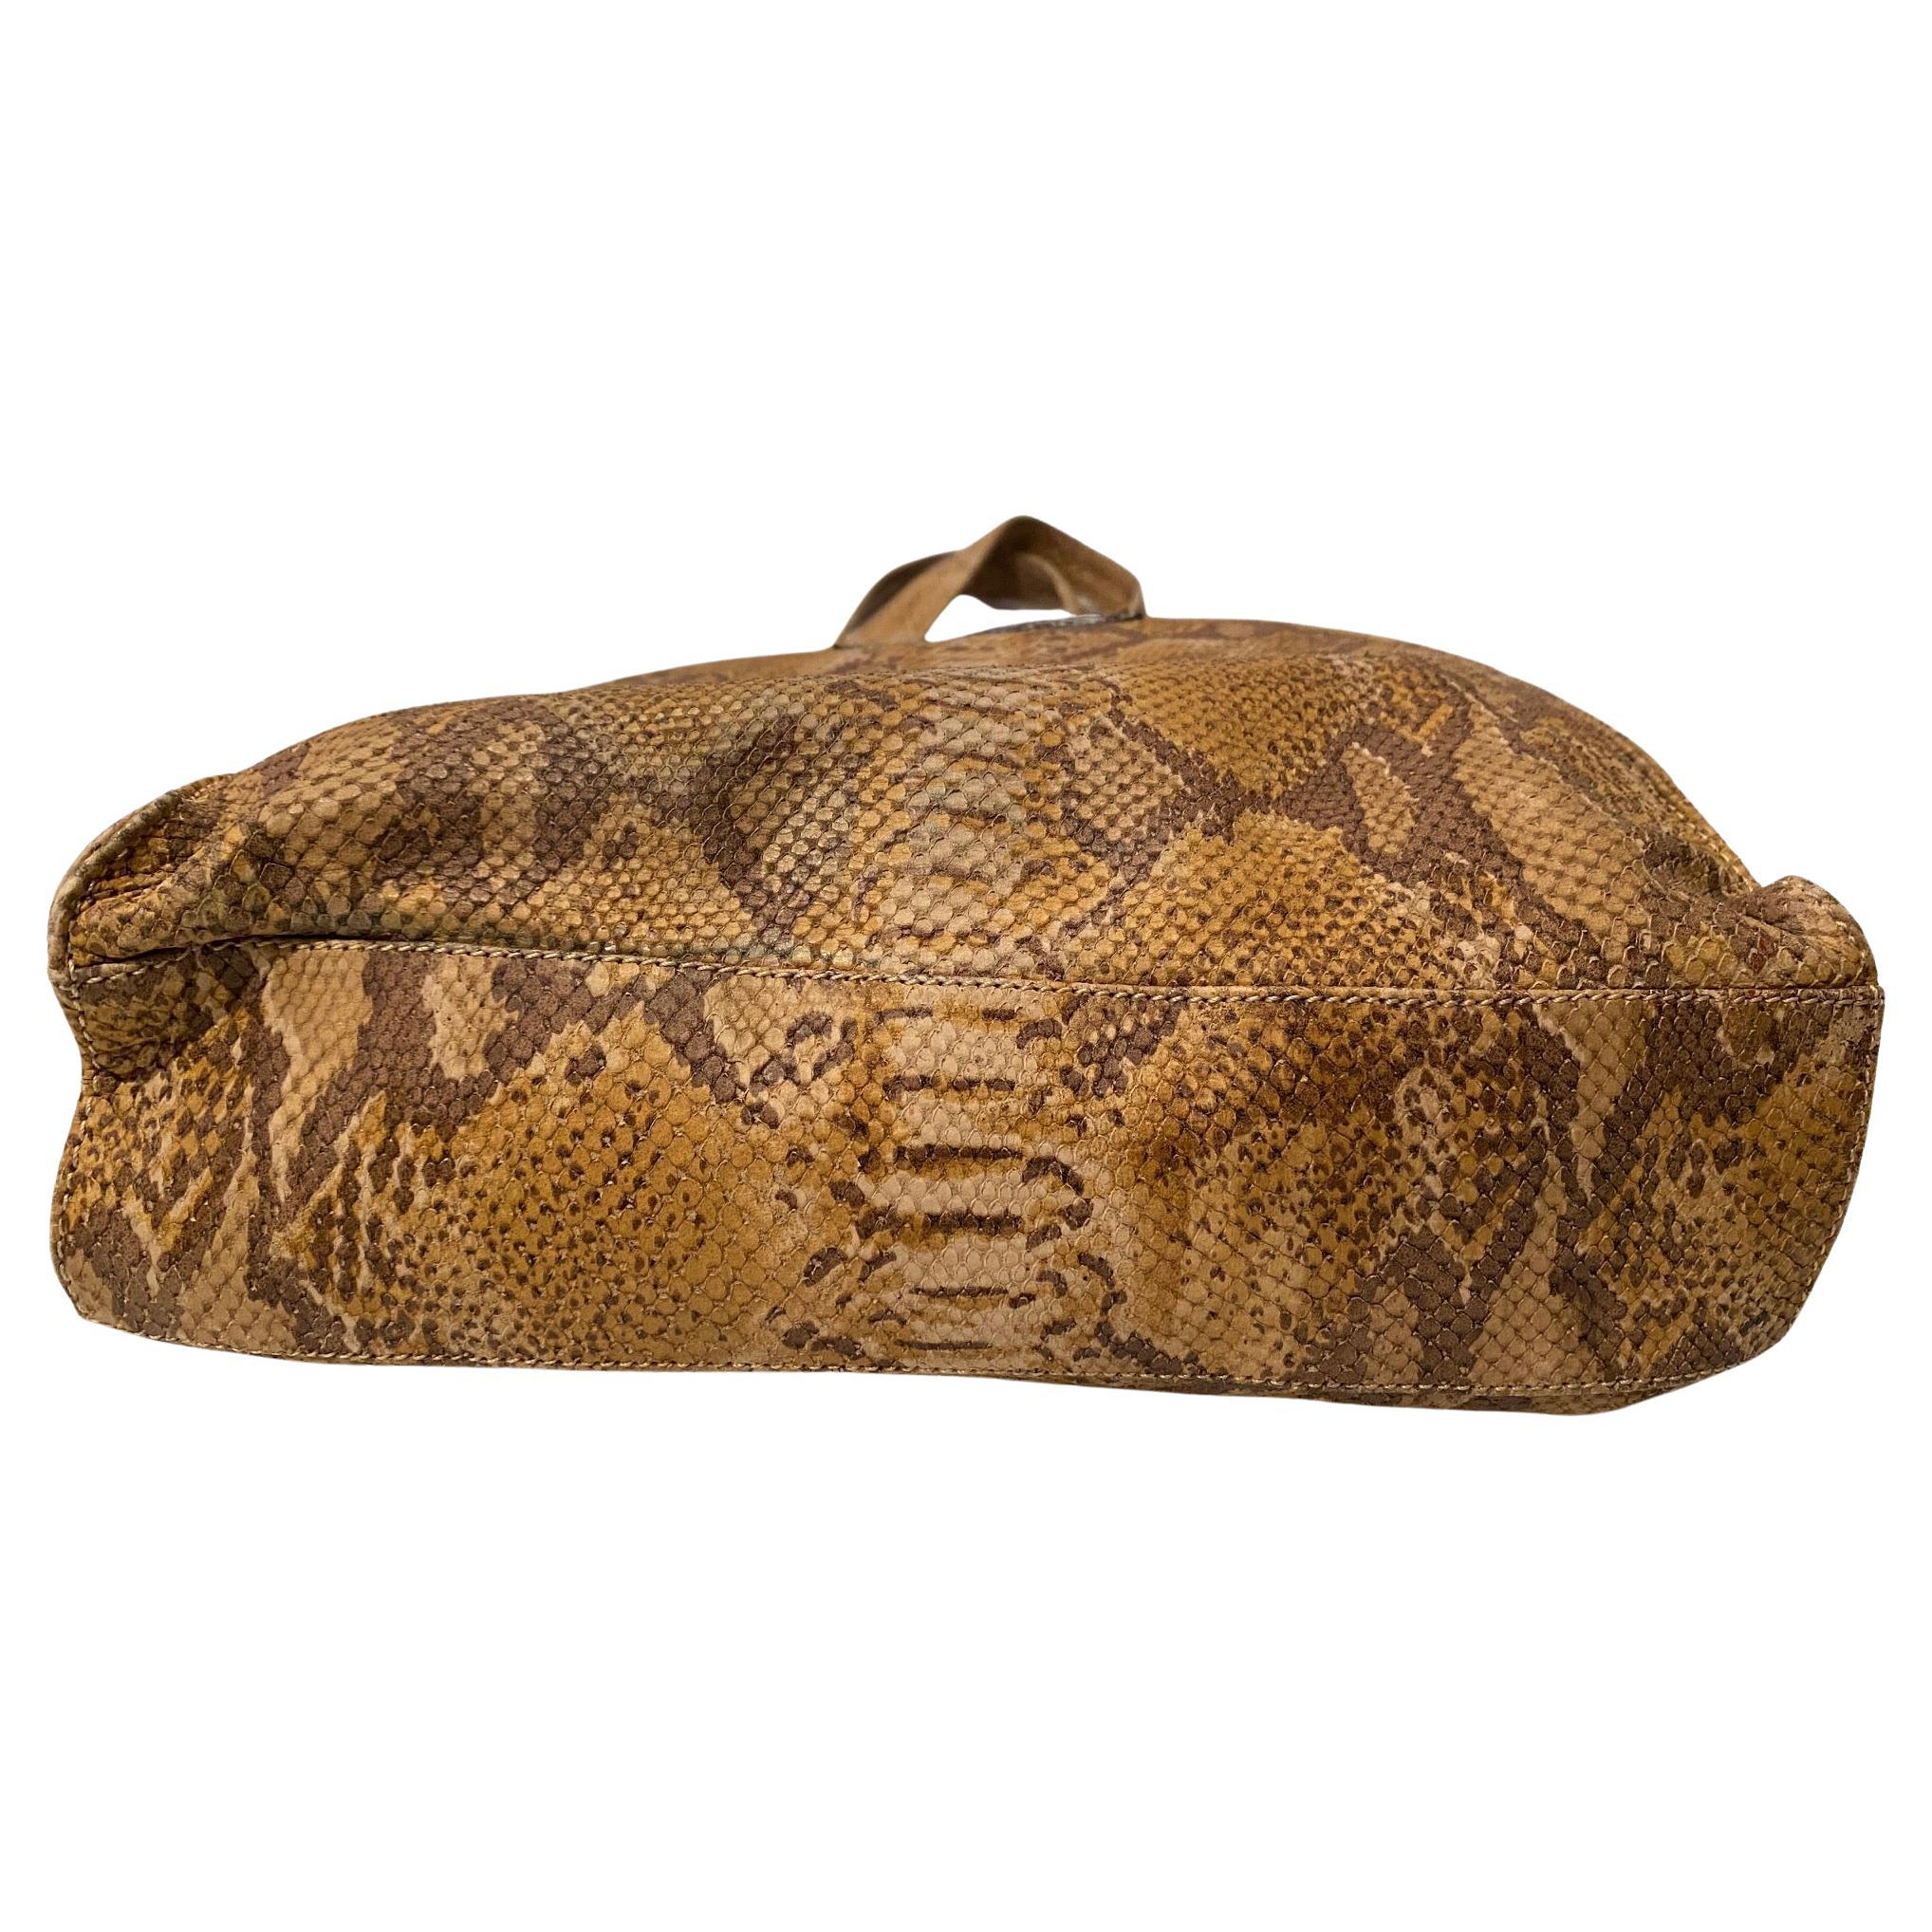 1990s D&G by Dolce Gabbana Brown Snake Print Shopper Tote Bag, soft leather, velcro closure, black lining, interior zipped pocket, Made in Italy  This bag is expertly crafted with high-quality materials, resulting in a long-lasting, stylish piece